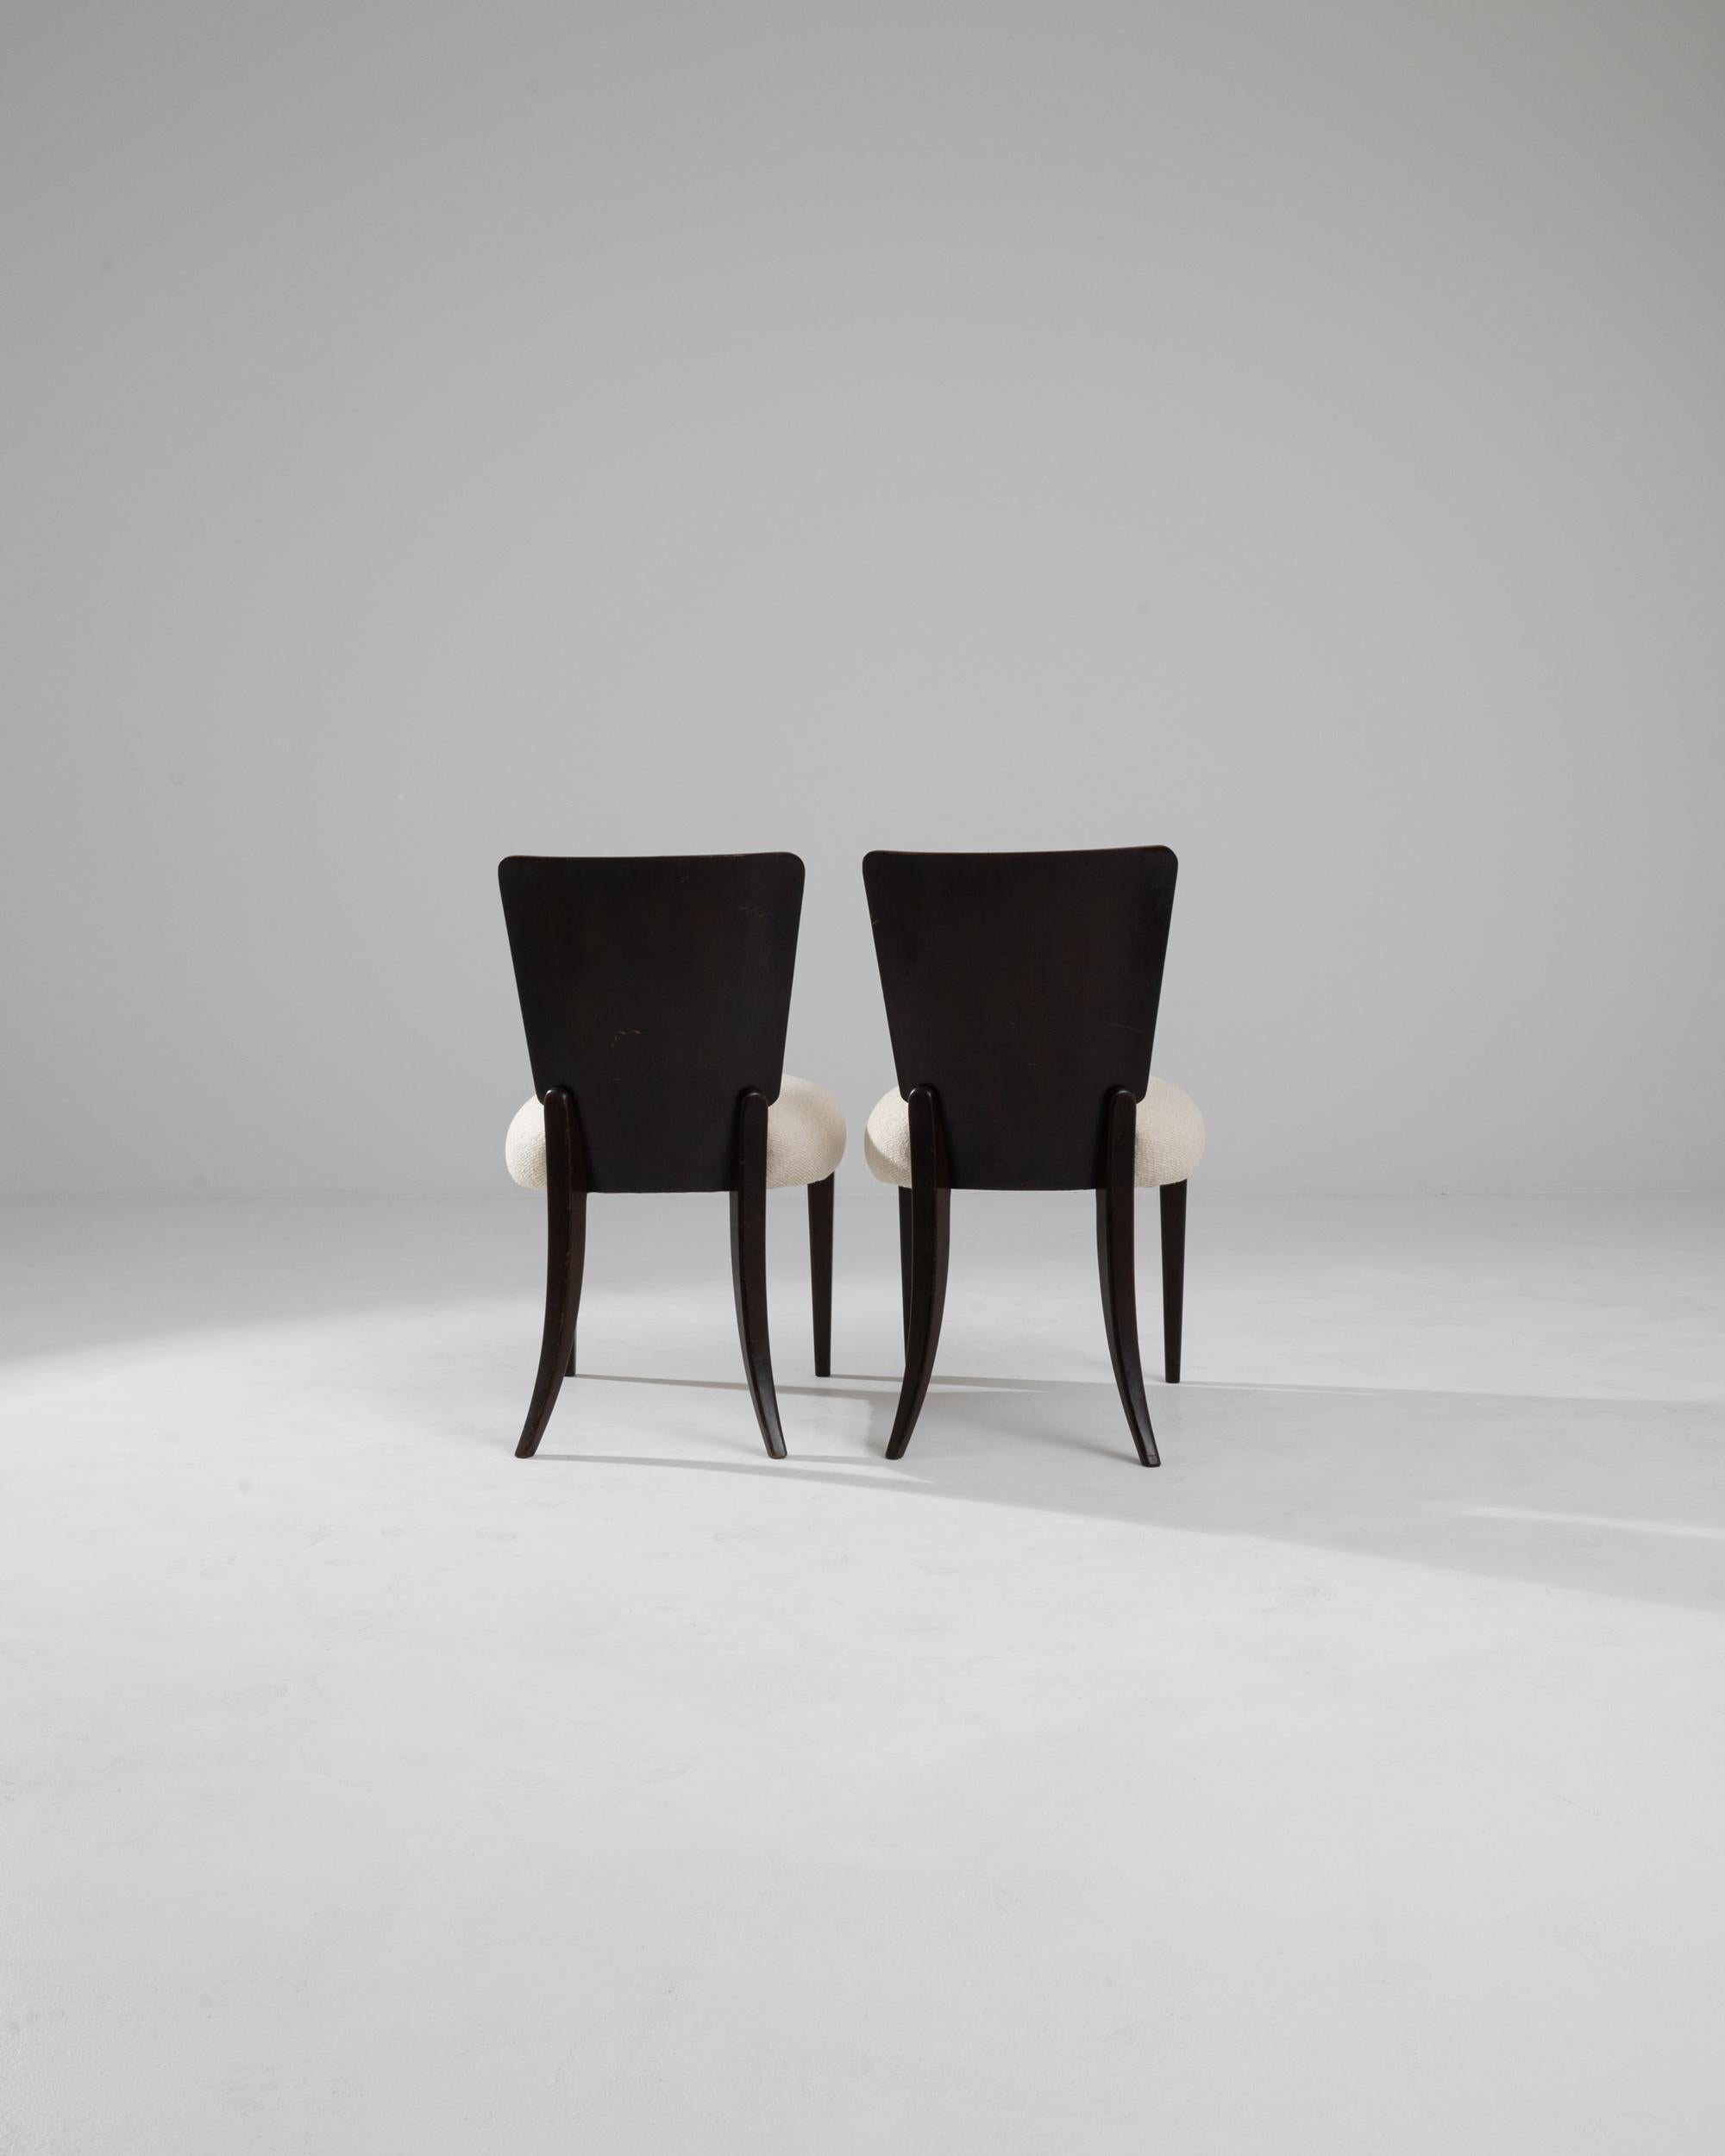 20th Century Czech Pair of Wooden Chairs by J. Halabala 1